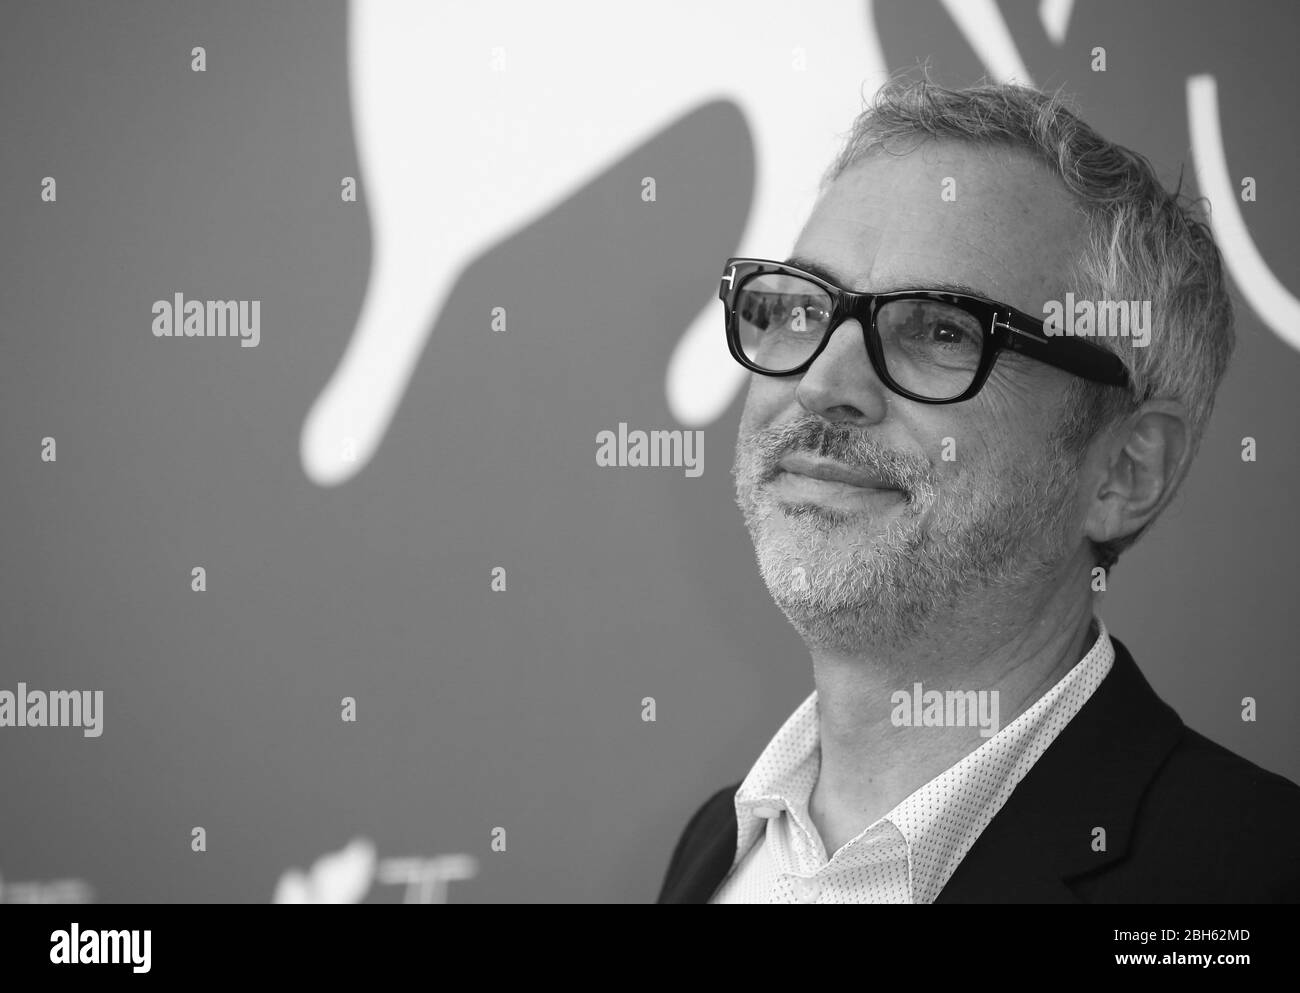 VENICE, ITALY - AUGUST 30: Alfonso Cuaron attends 'Roma' photocall during the 75th Venice Film Festival on August 30, 2018 in Venice, Italy. Stock Photo